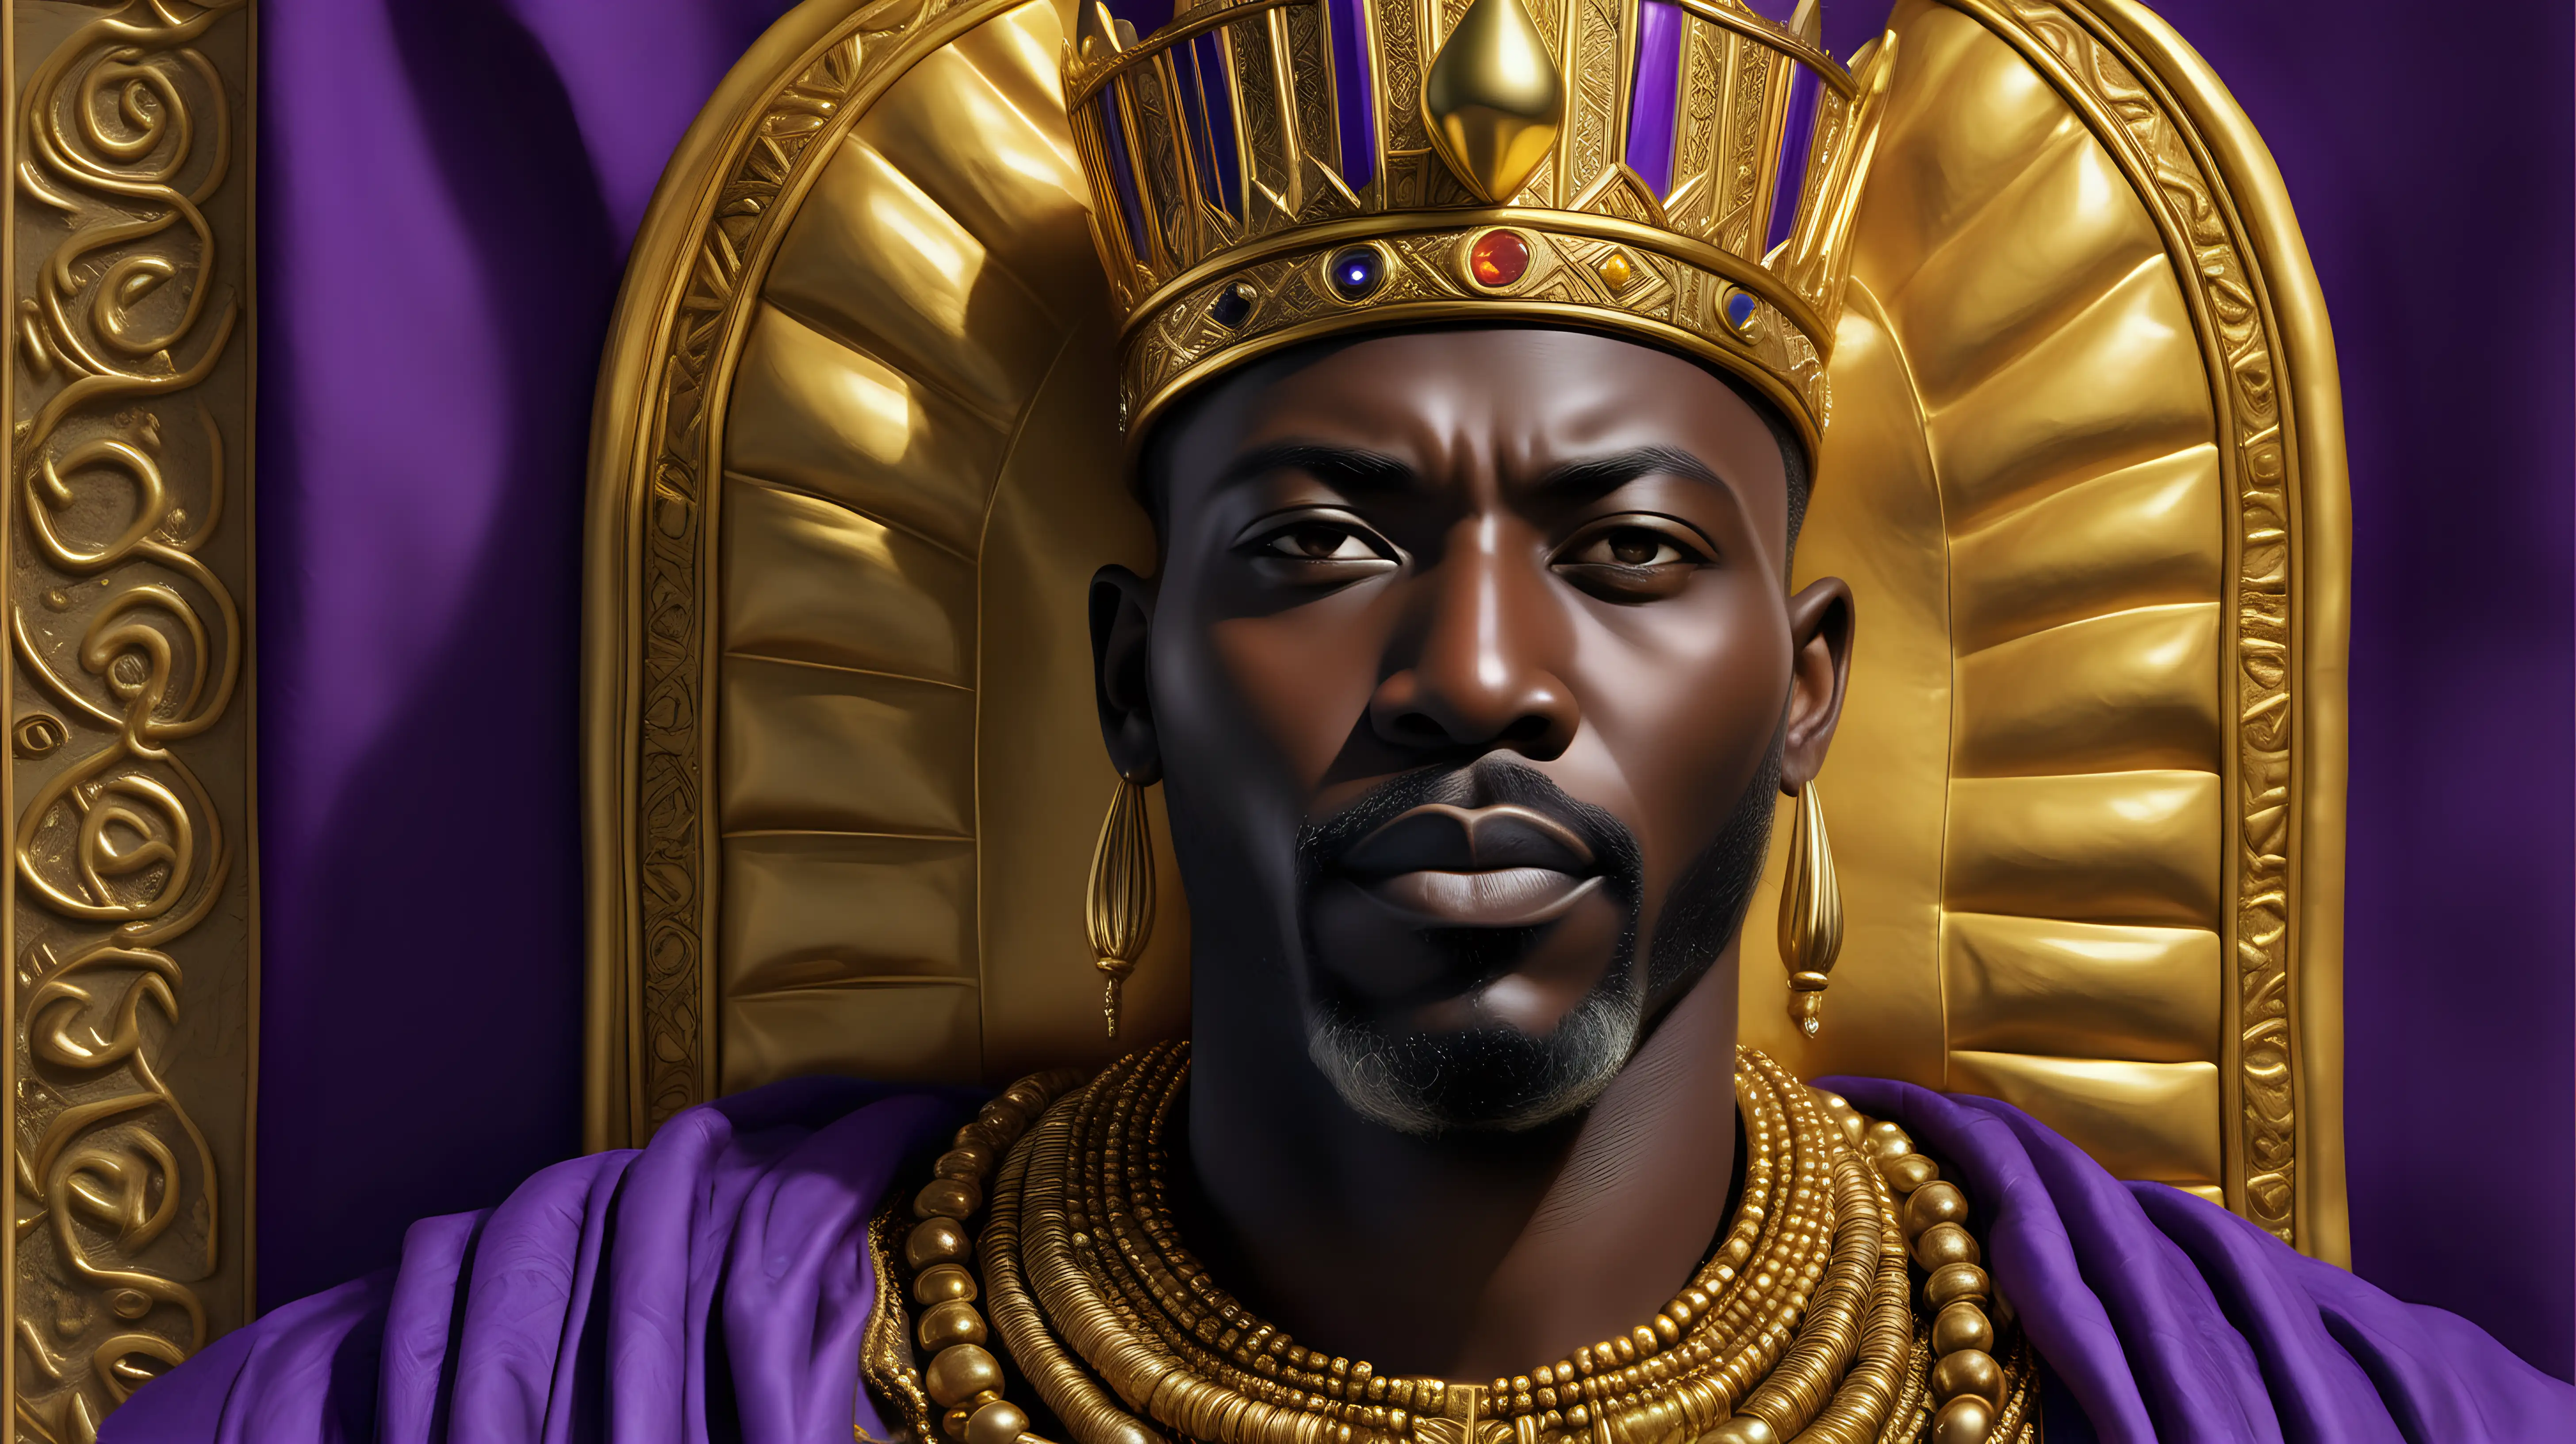 Main Subject: Mansa Musa, the legendary King of Mali.
Camera Position and Angle: Close-up view, with Mansa Musa facing directly towards the camera.
Facial Expression: Regal and composed, conveying authority and confidence. Mansa Musa's eyes should express intensity.
Attire and Accessories: Mansa Musa is adorned with an ornate king's crown. He also wears gold earrings and multiple gold necklaces, emphasizing his wealth and status.
Lighting: Natural, softly highlighting Mansa Musa's facial contours and the intricacies of his jewelry.
Background: Purple and simple, with a high contrast to Mansa Musa's figure, devoid of many distracting elements.
Image Format: 16:9 ratio, ideal for wide-screen display.